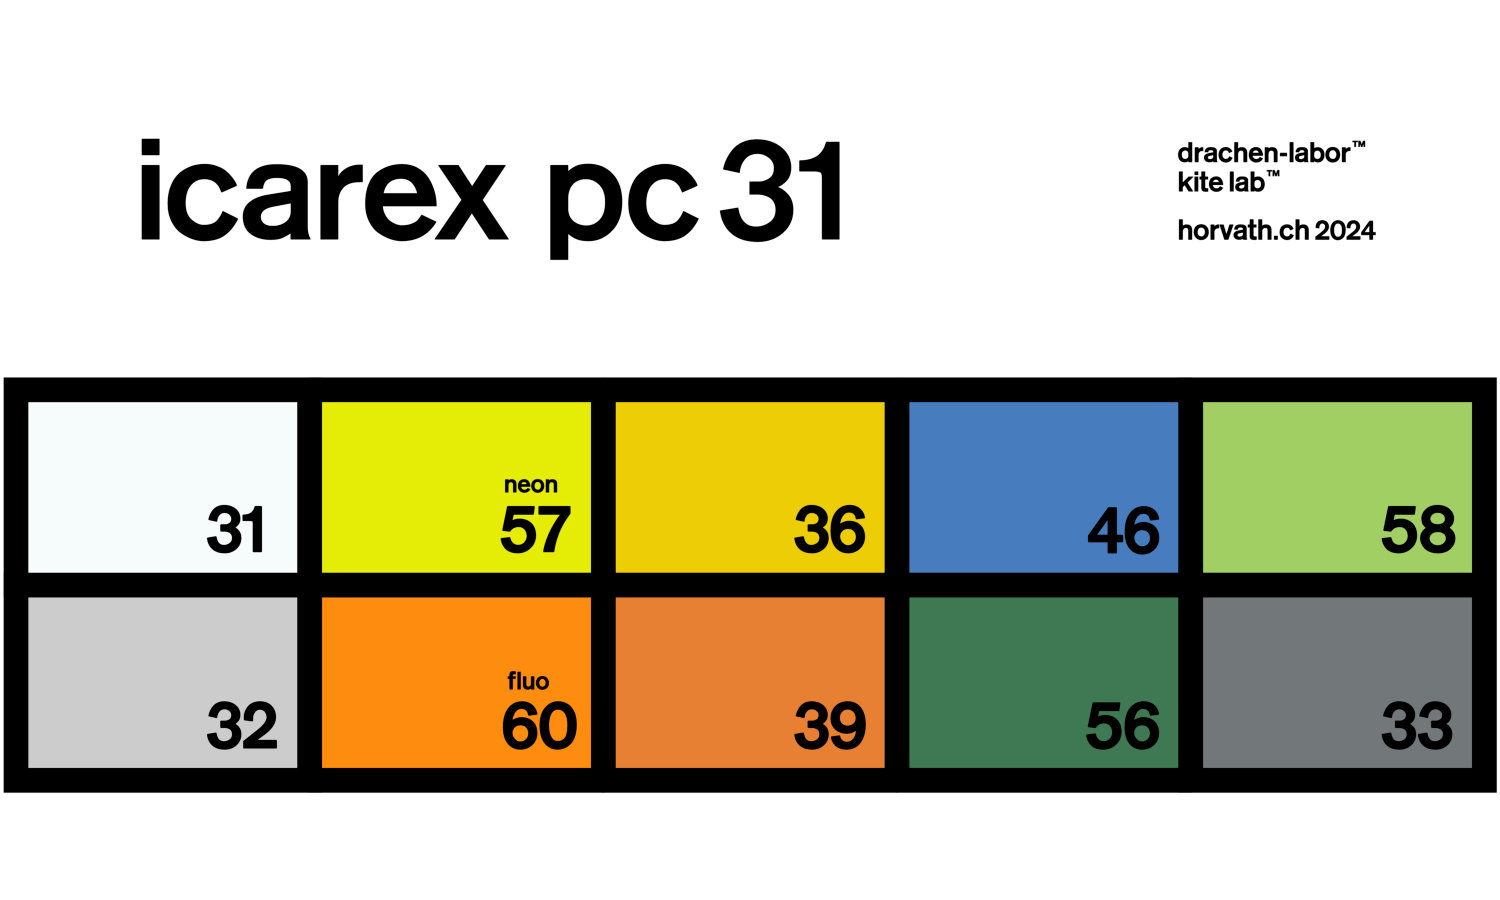 Kite fabric Icarex: the color palette for zero-wind-kites in 2023.